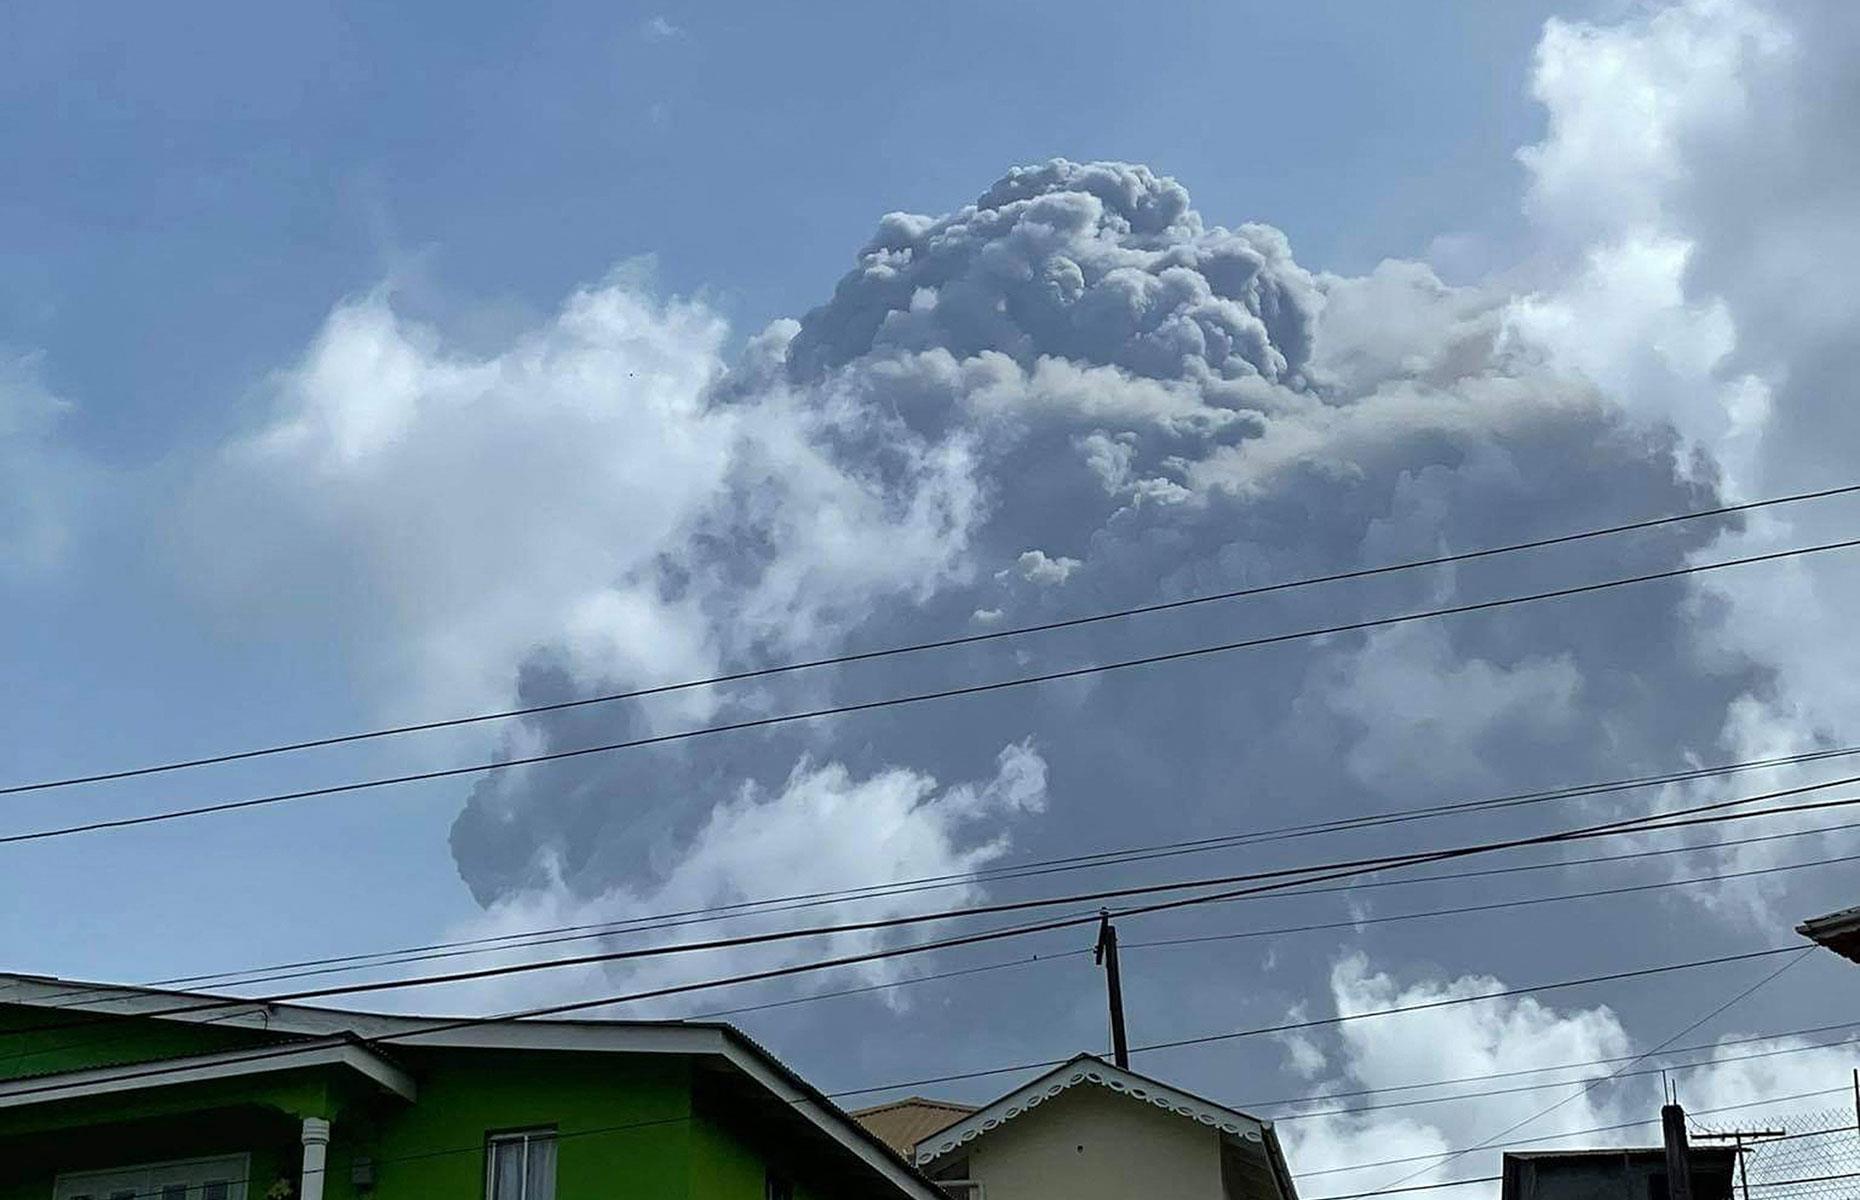 The normally bright skies of the island of Saint Vincent and its Caribbean neighbors turned a murky grey when La Soufrière erupted on Friday 9 April 2021. It was the first activity from the volcano in 40 years and only the fifth big event since records started in 1718. The ash cloud apparently reached 20,000 feet (6,000m) and saw residents in the immediate area evacuated.